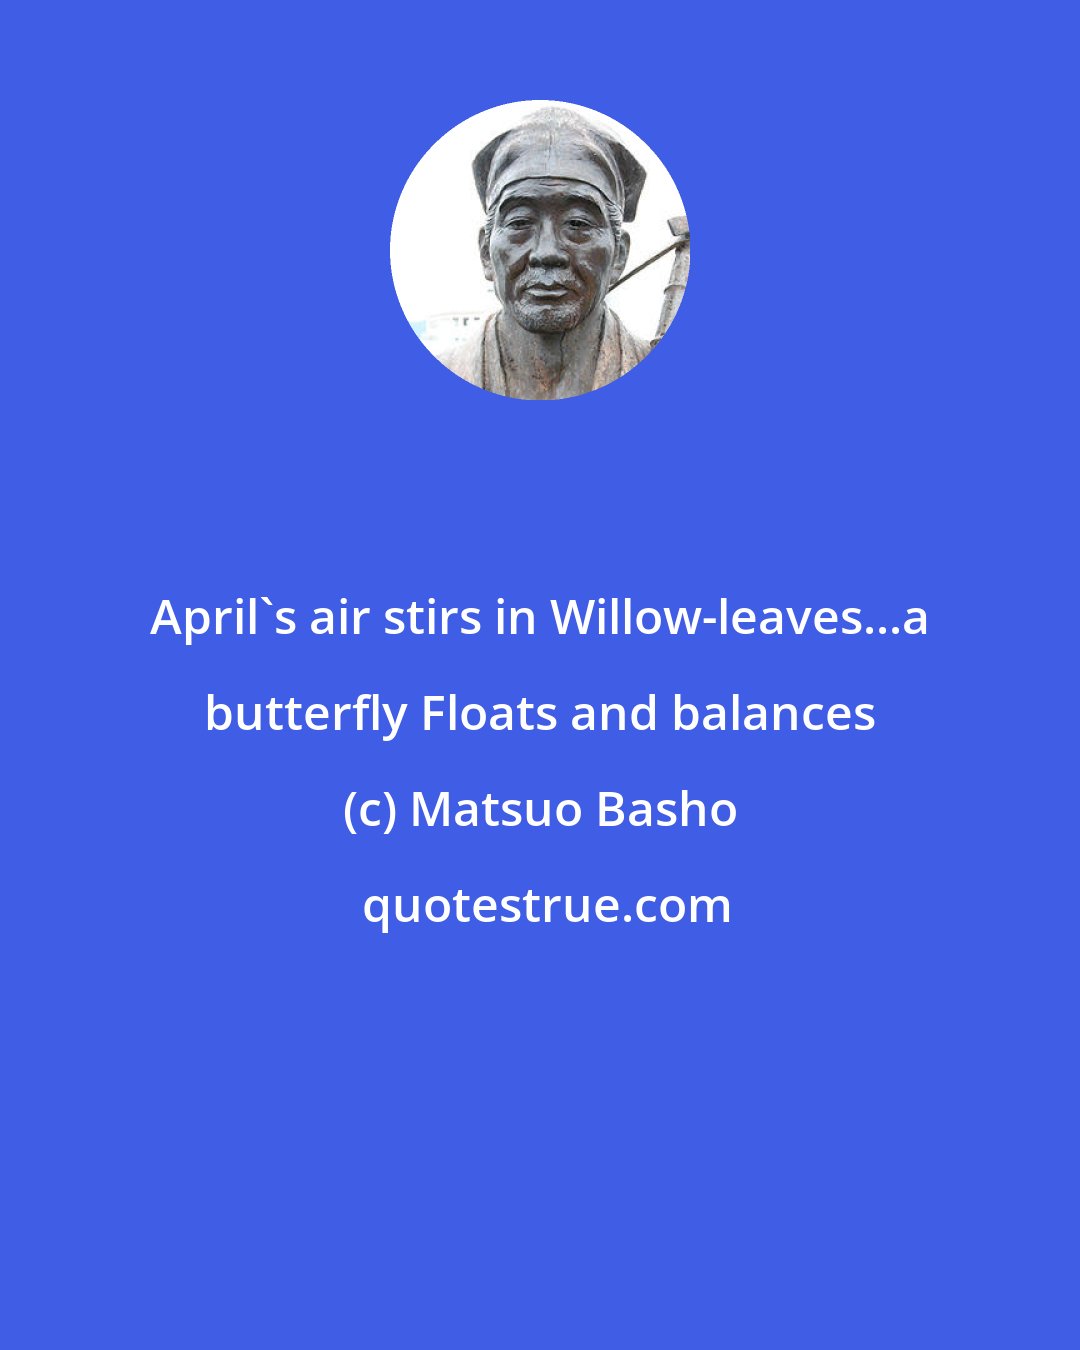 Matsuo Basho: April's air stirs in Willow-leaves...a butterfly Floats and balances